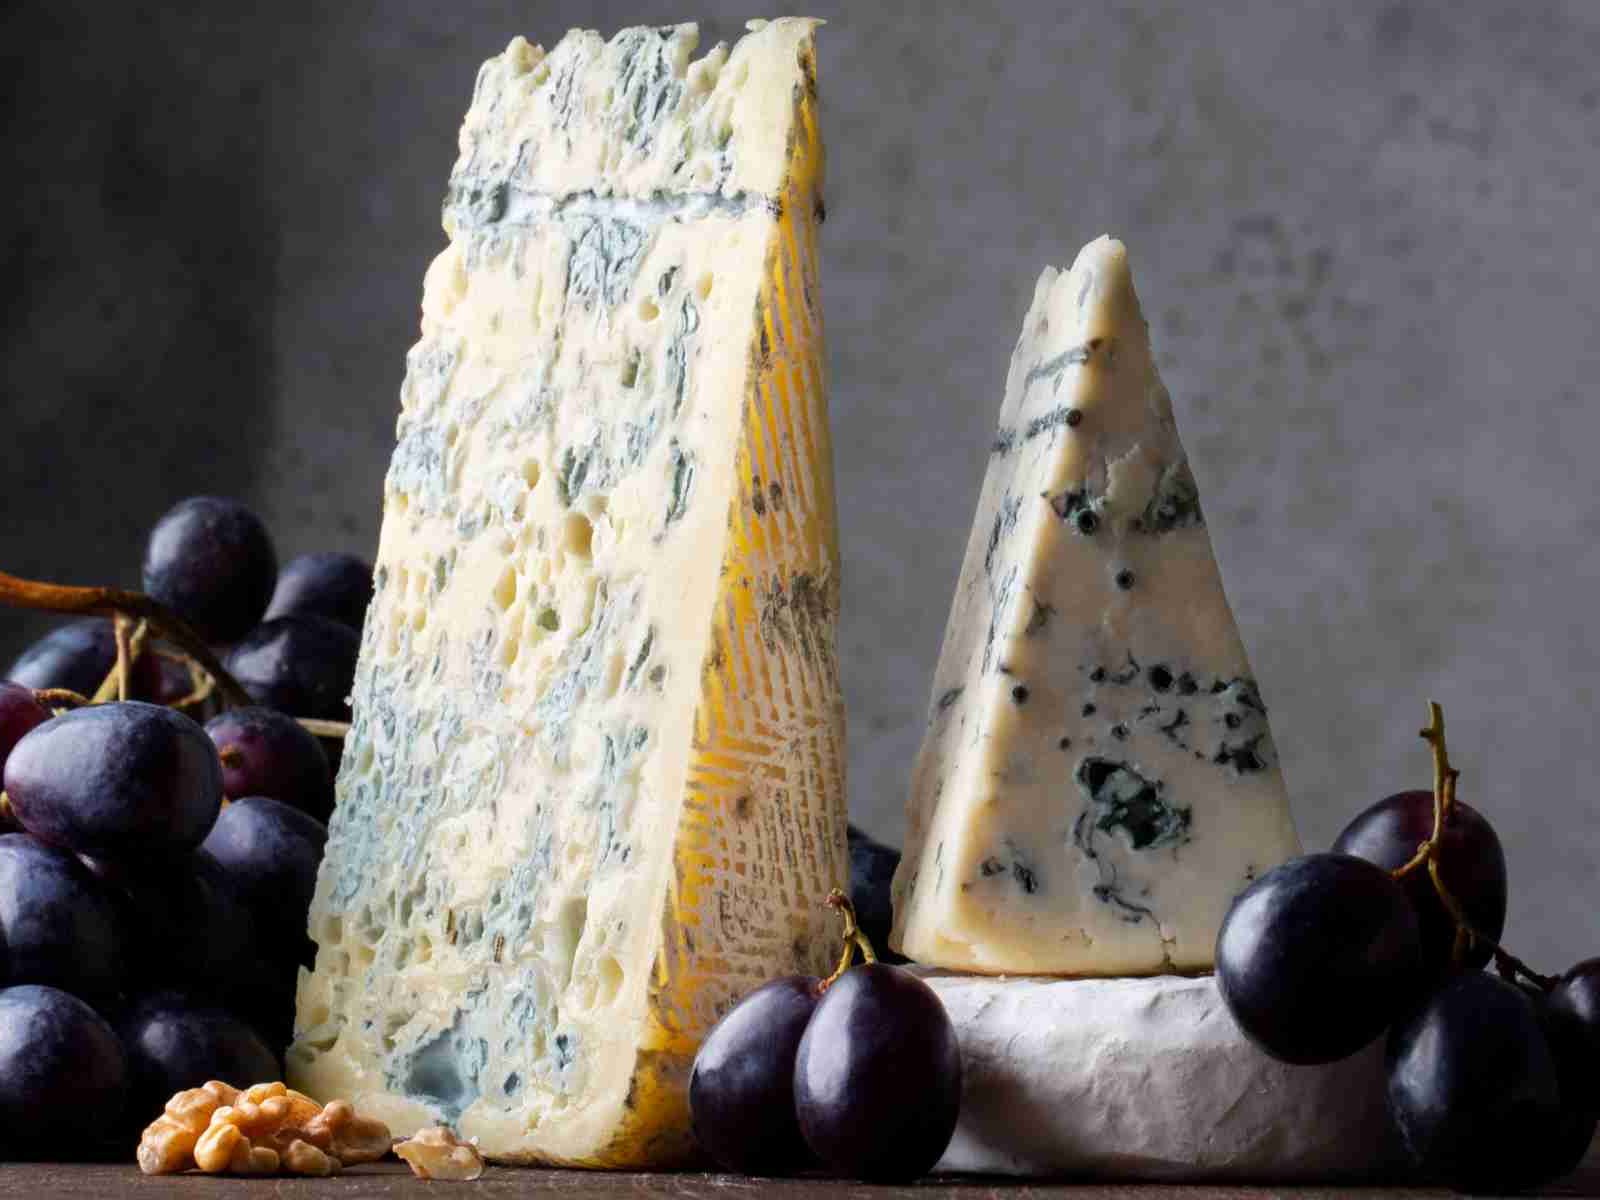 There is so much more to UK blue cheese than just Stilton.